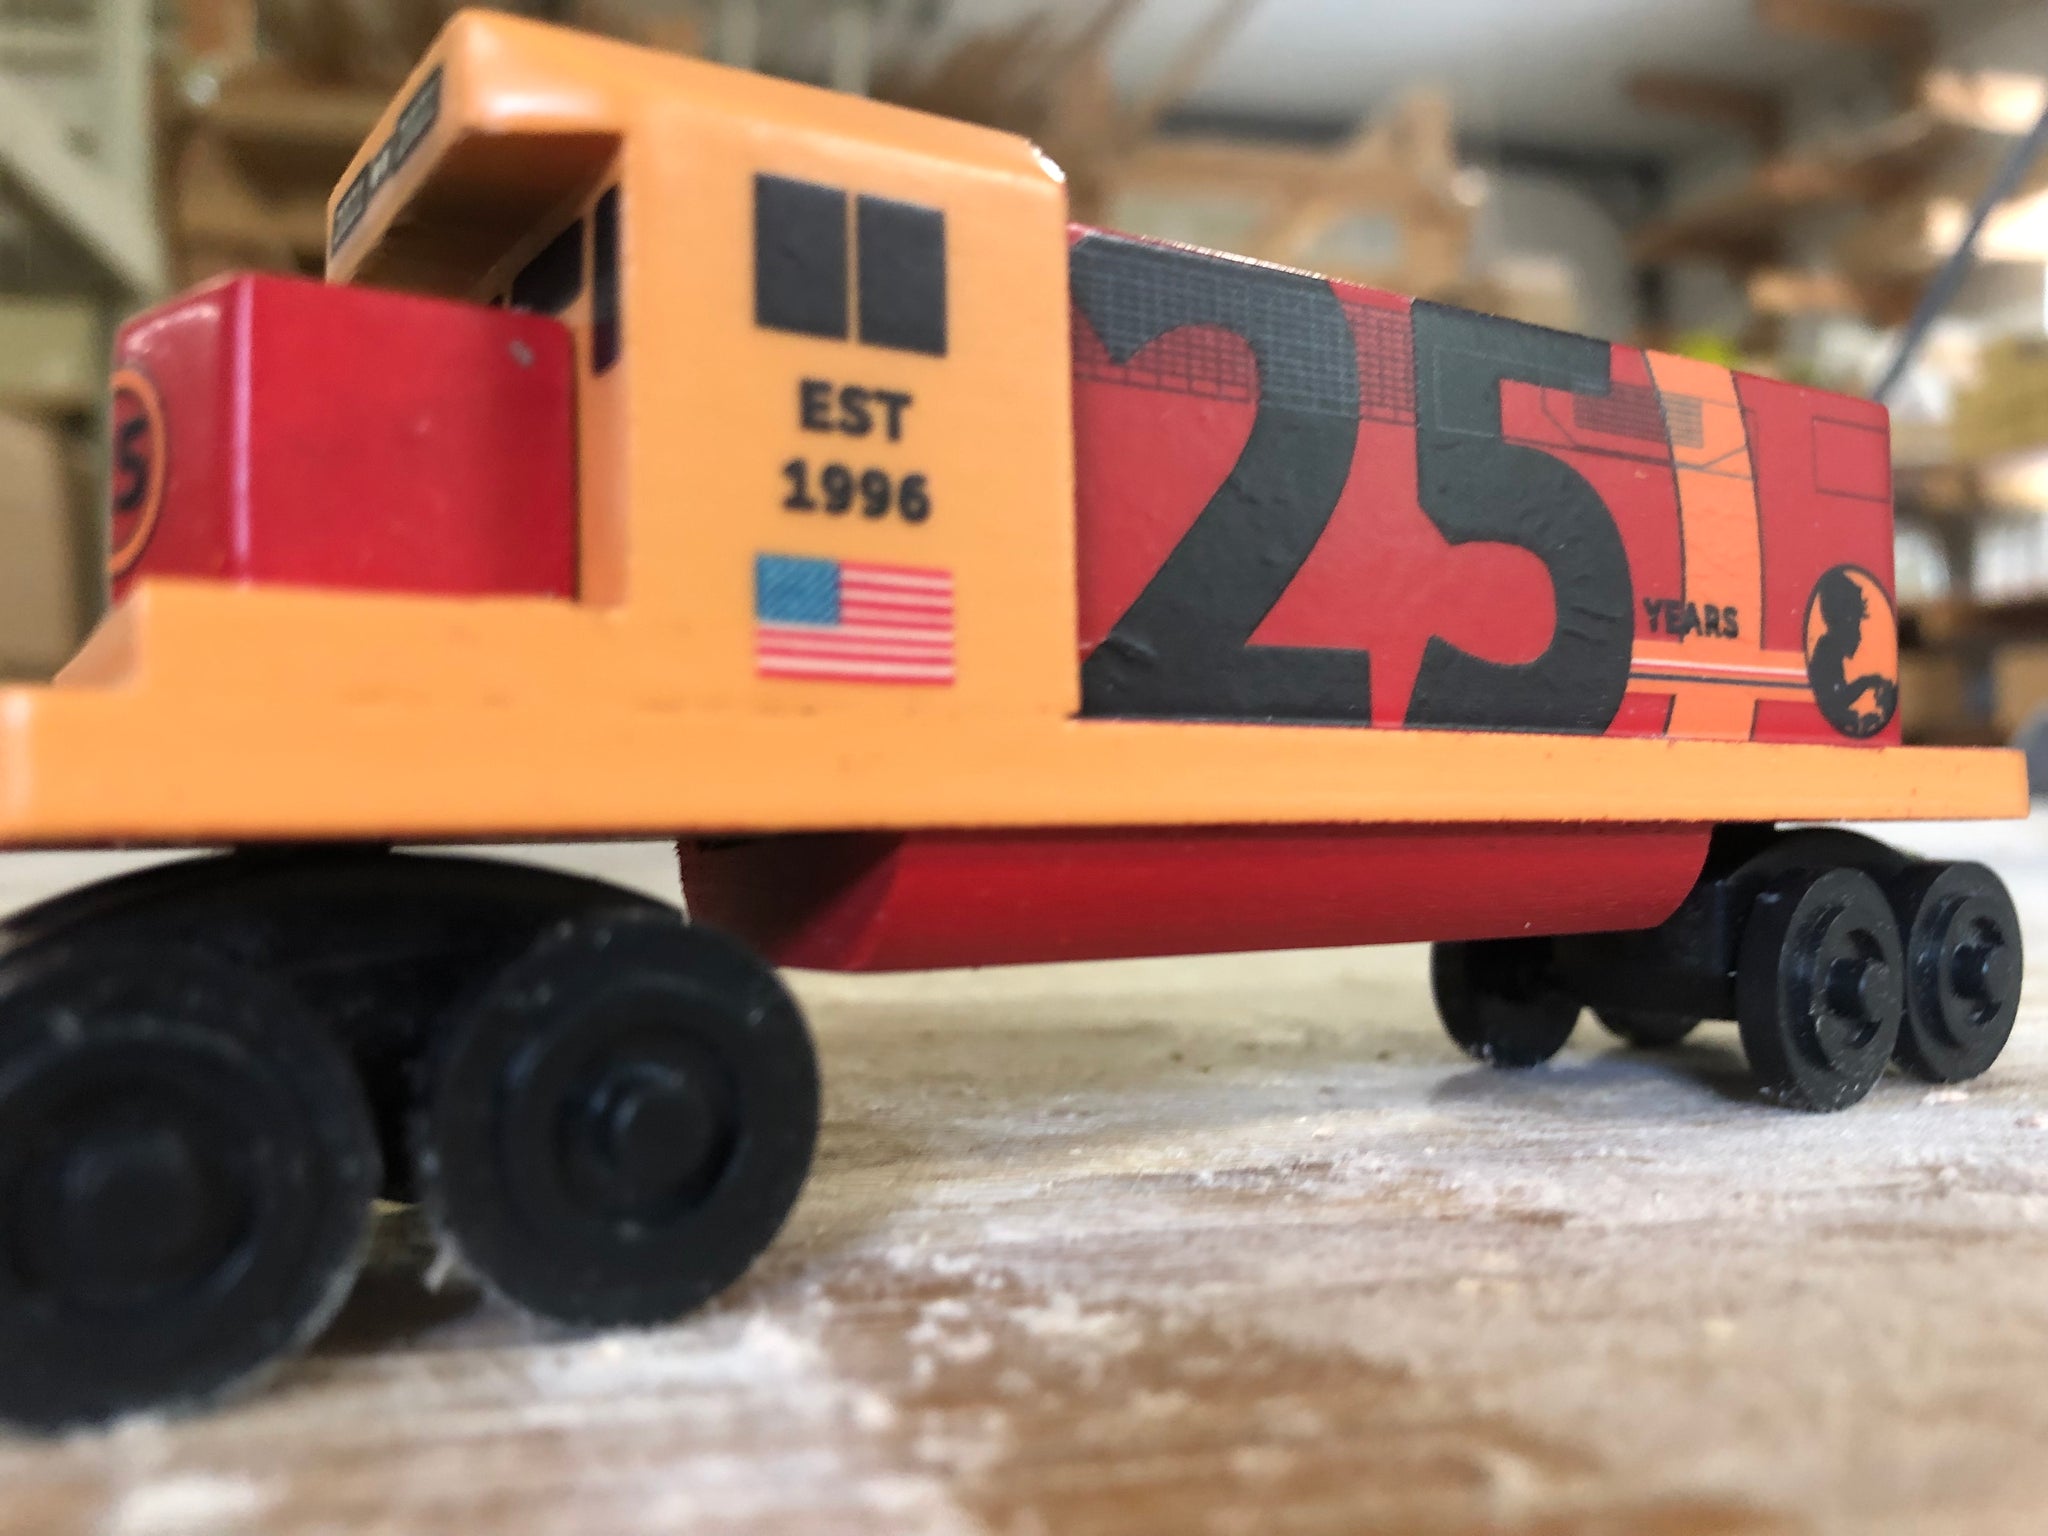 "25 Years" Commemorative Engine by Whittle Shortline Railroad